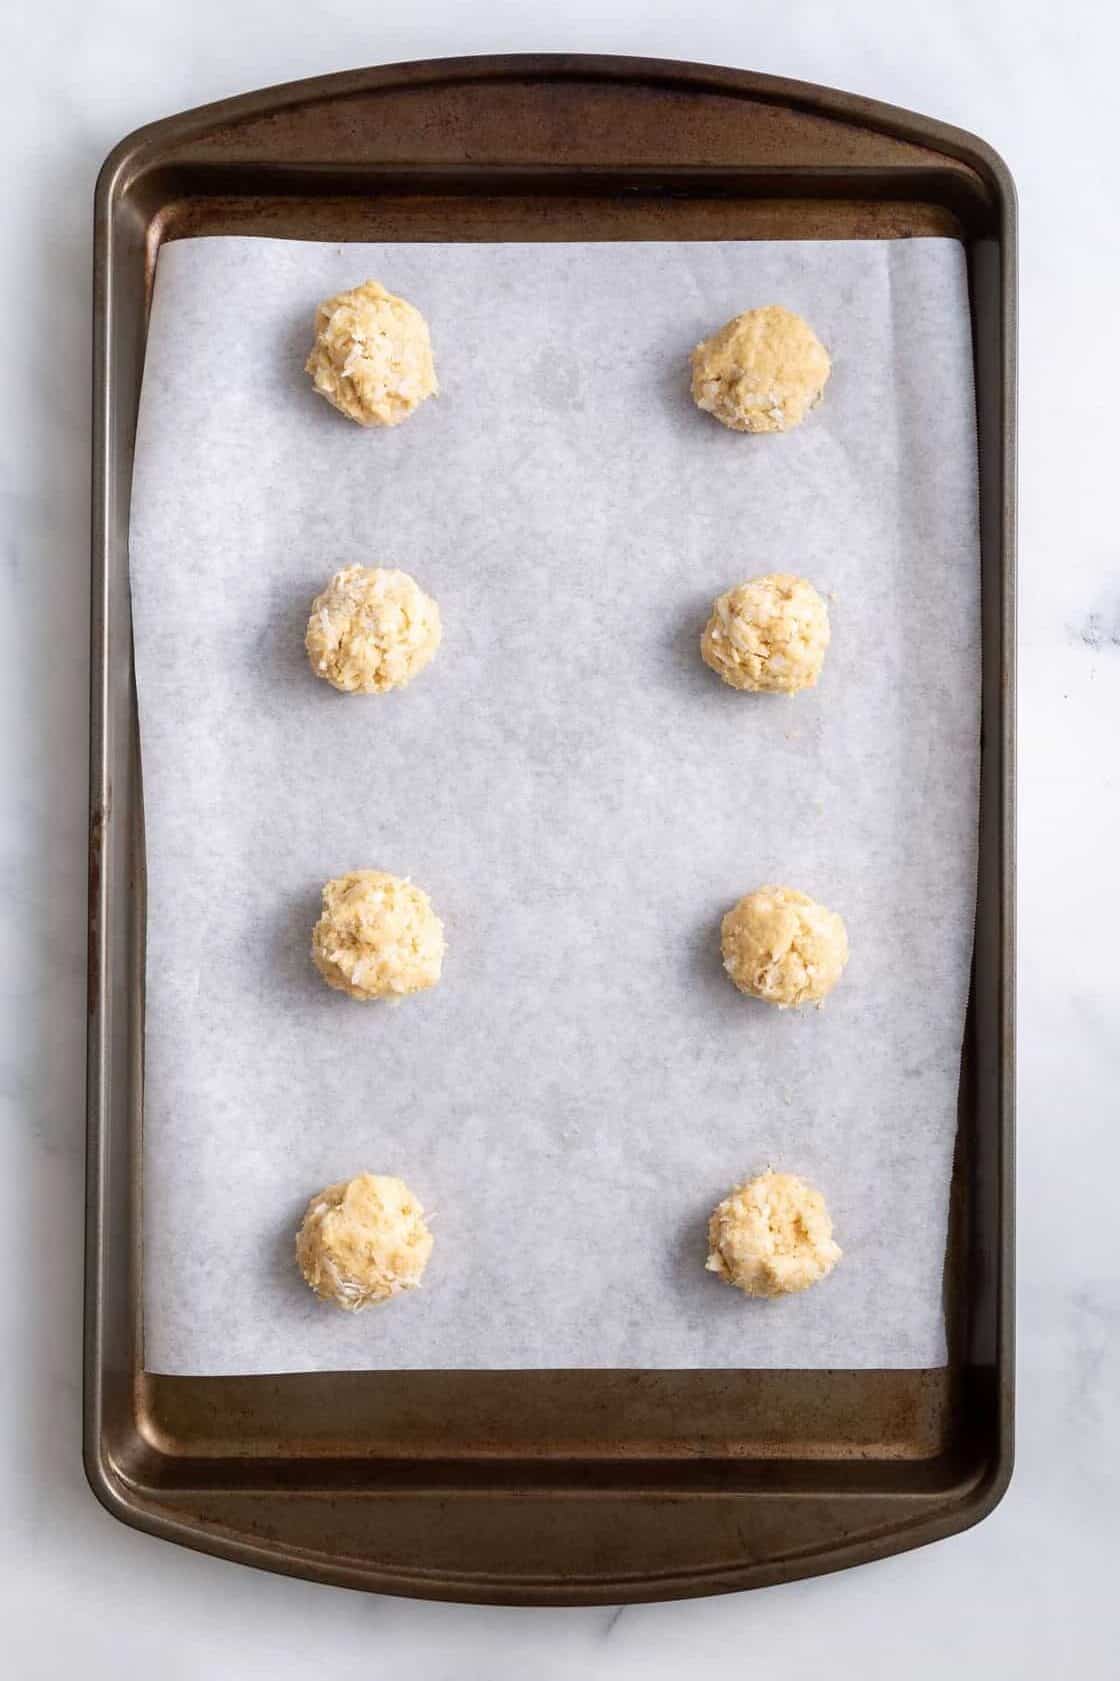 eight coconut cookie batter dough balls sitting on a baking tray with a baking sheet 